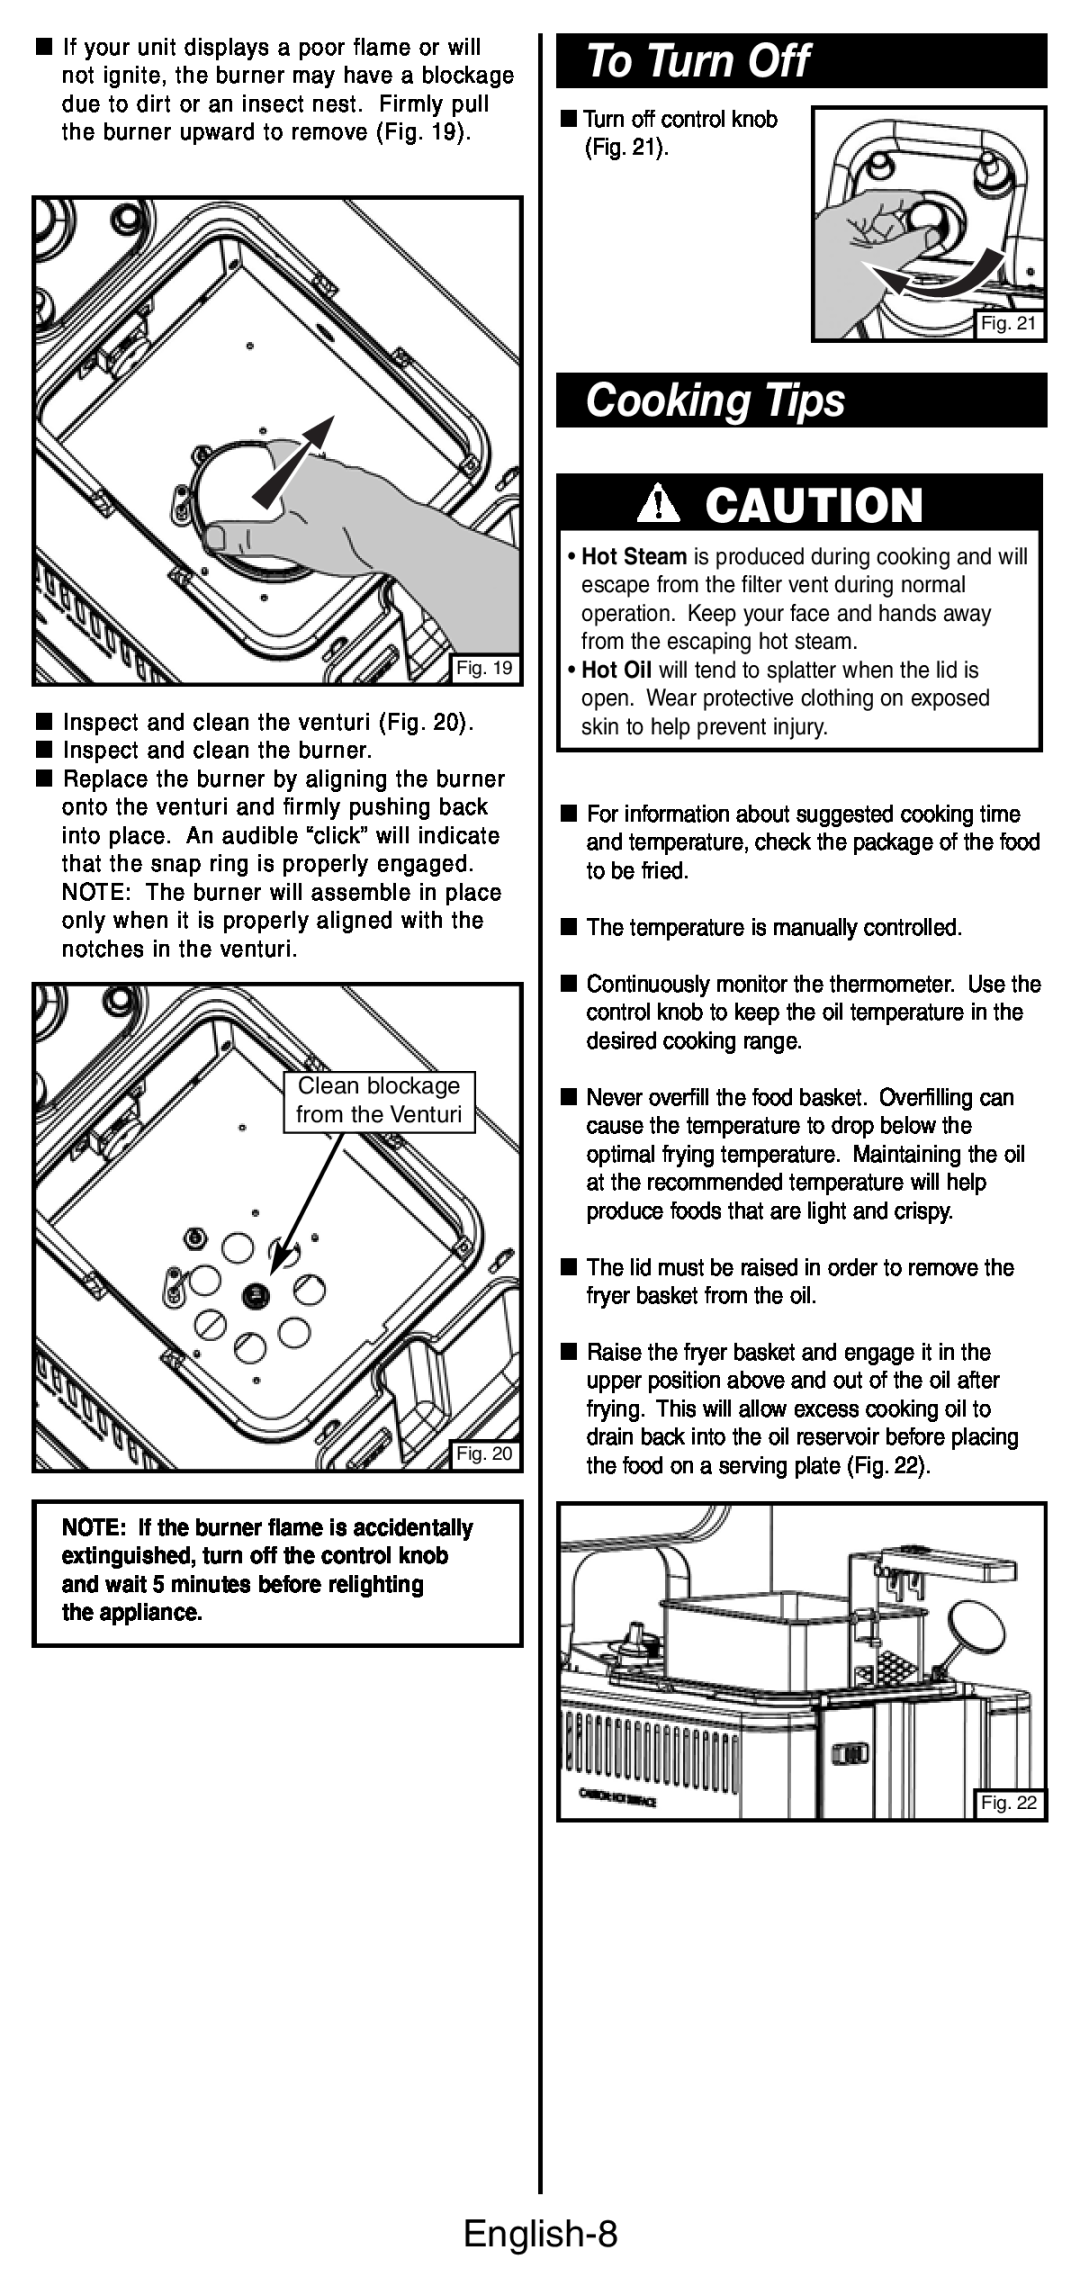 Coleman 9937 instruction manual To Turn Off, Cooking Tips, English-8 